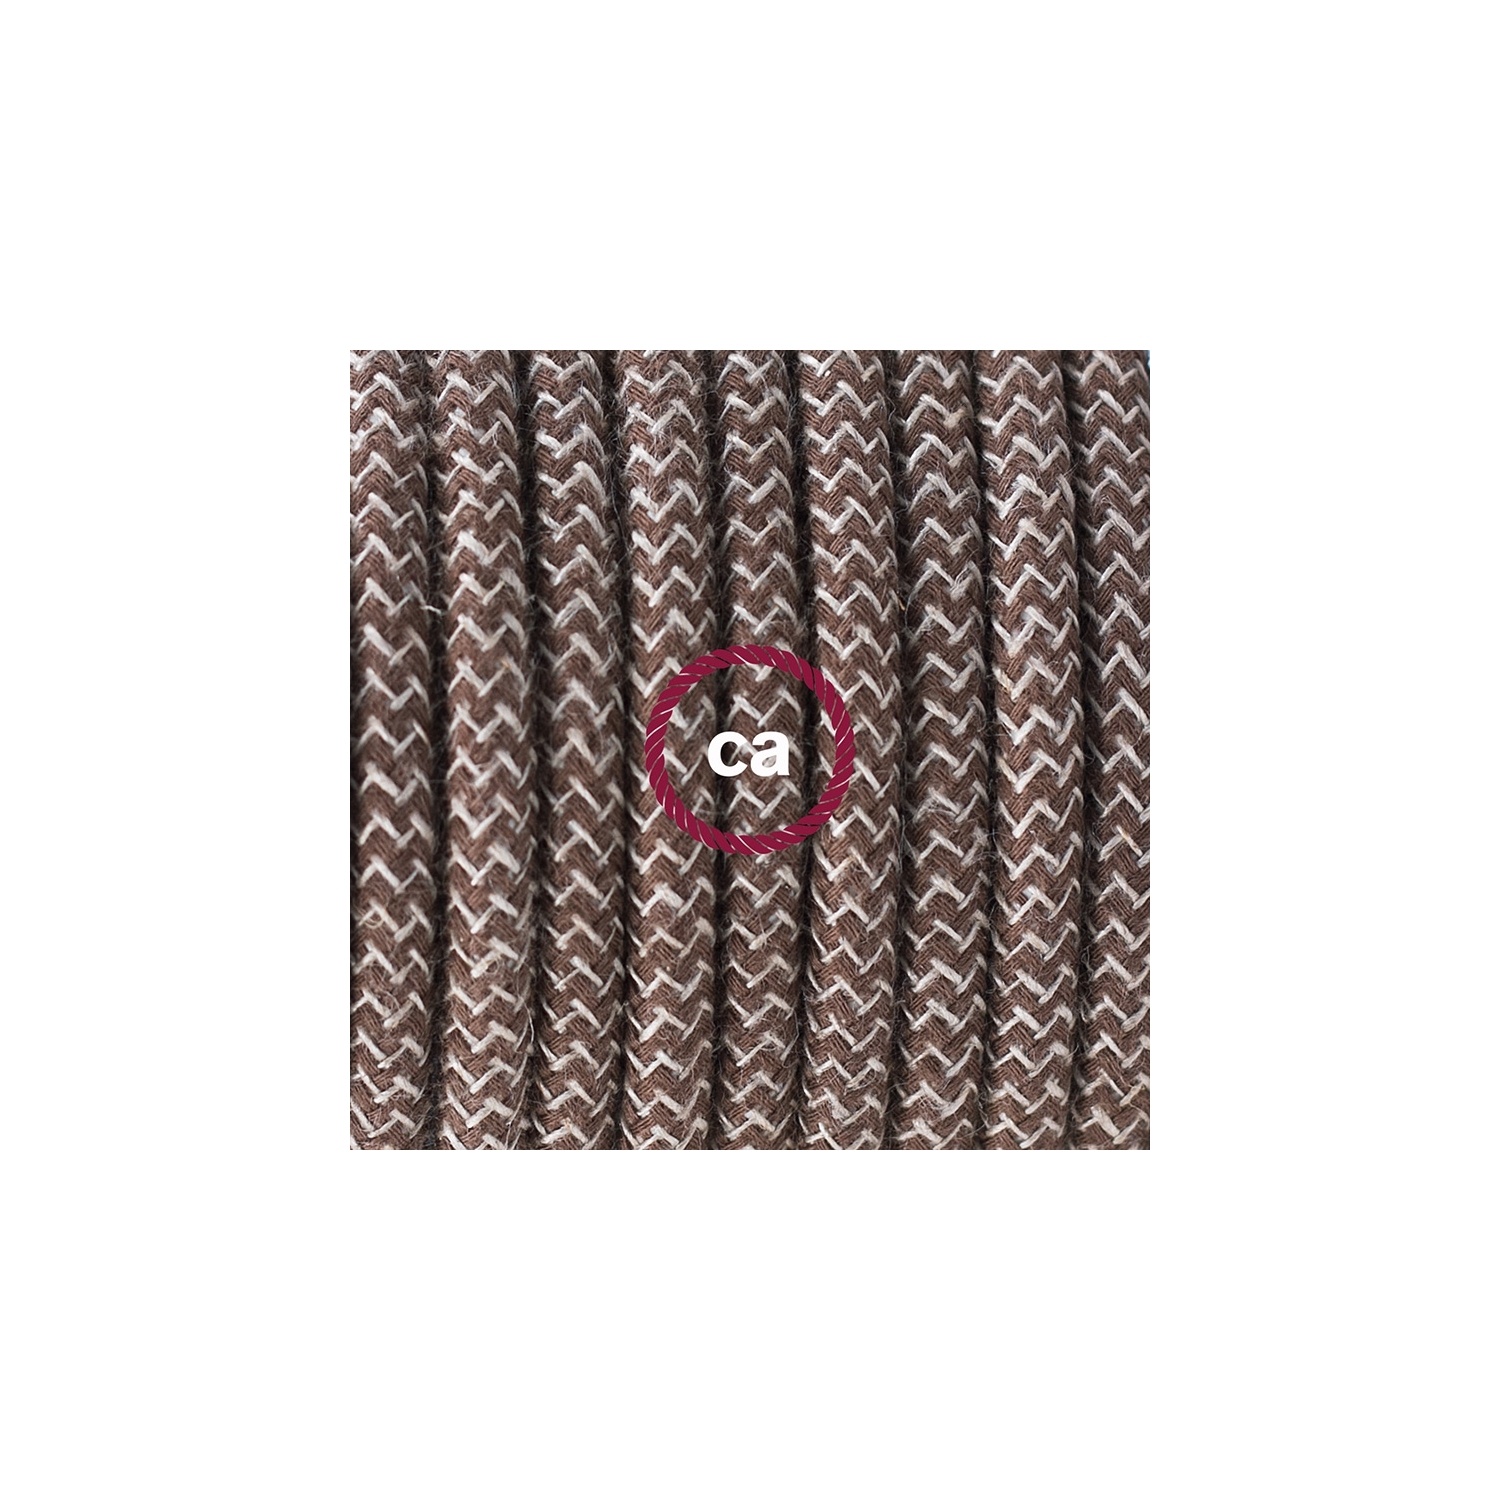 Plug-in Pendant with switch on socket | RD73 Natural & Brown Linen Chevron